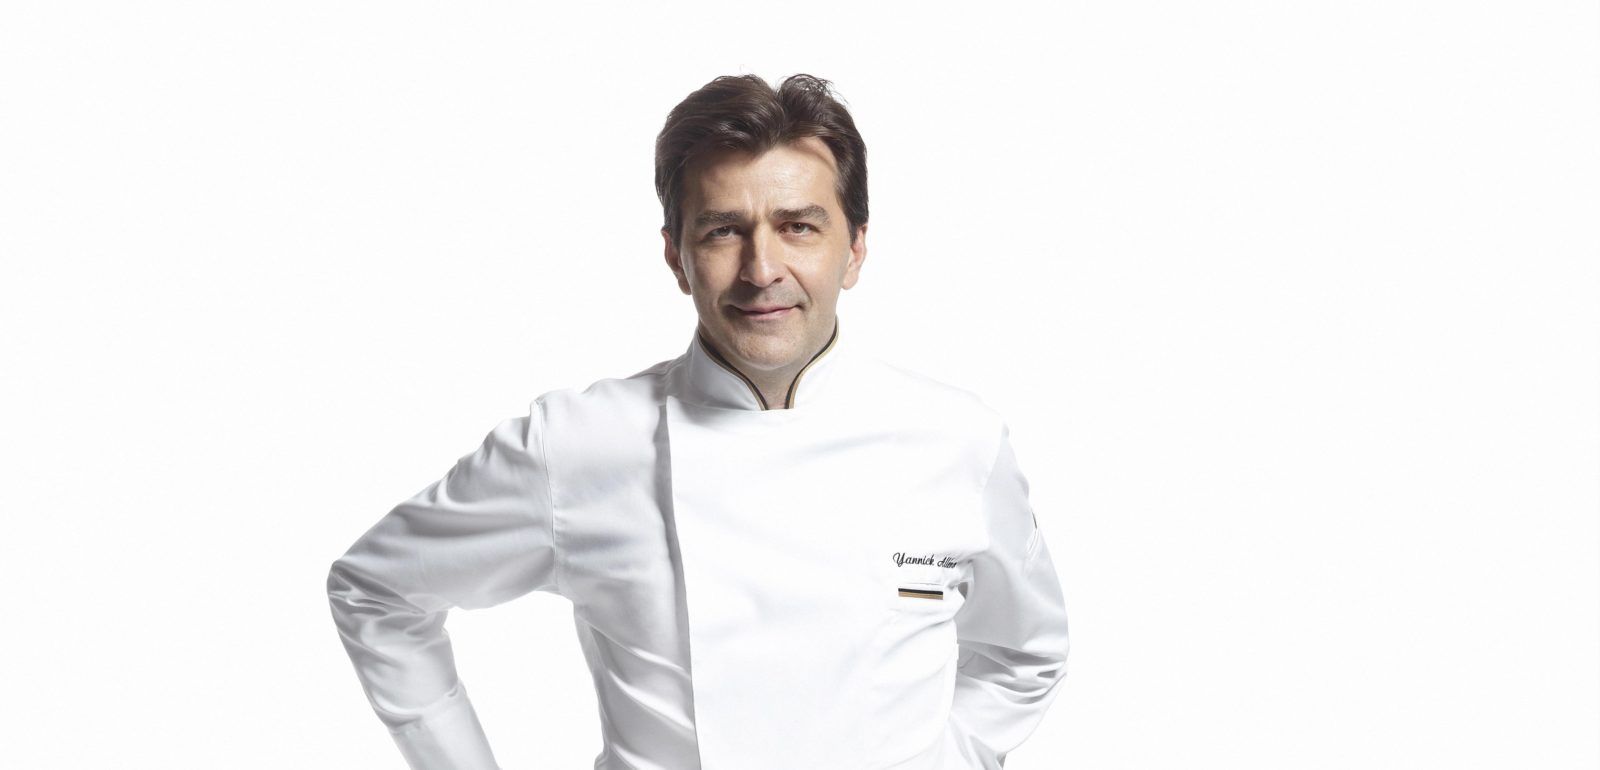 Chef Yannick Alléno on his collaboration with The Orient Express